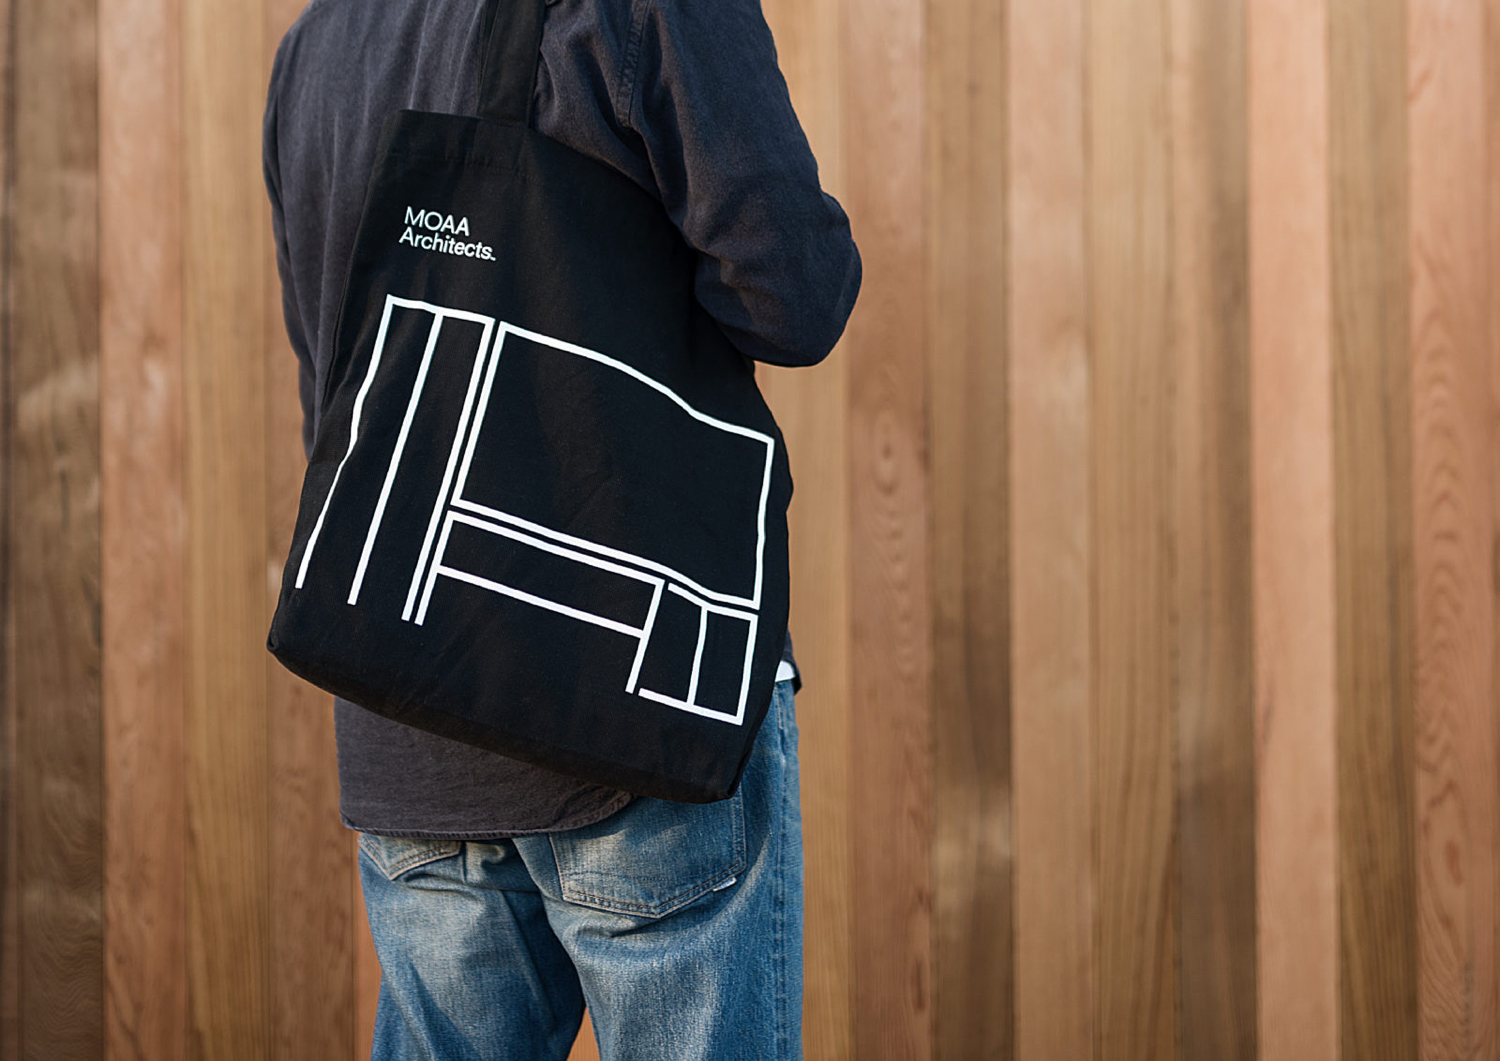 Tote Bag Design – MOAA Architects by Inhouse, New Zealand